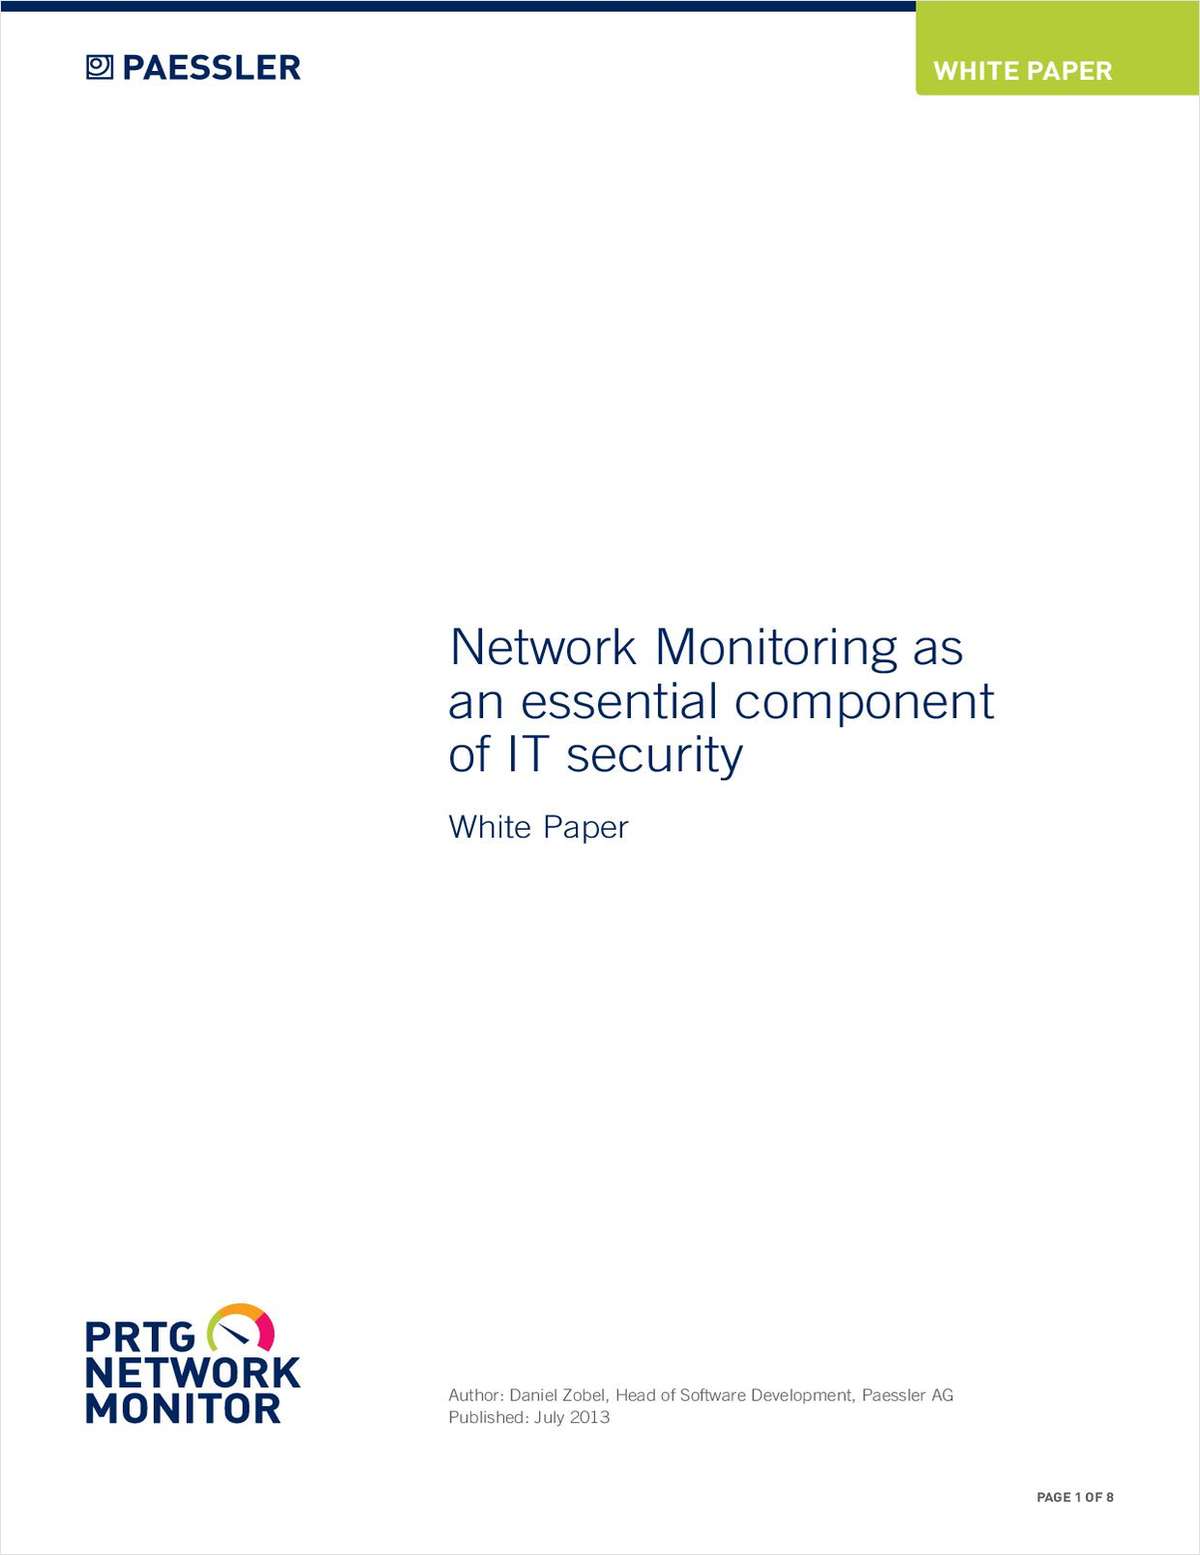 Network Monitoring as an Essential Component of IT Security